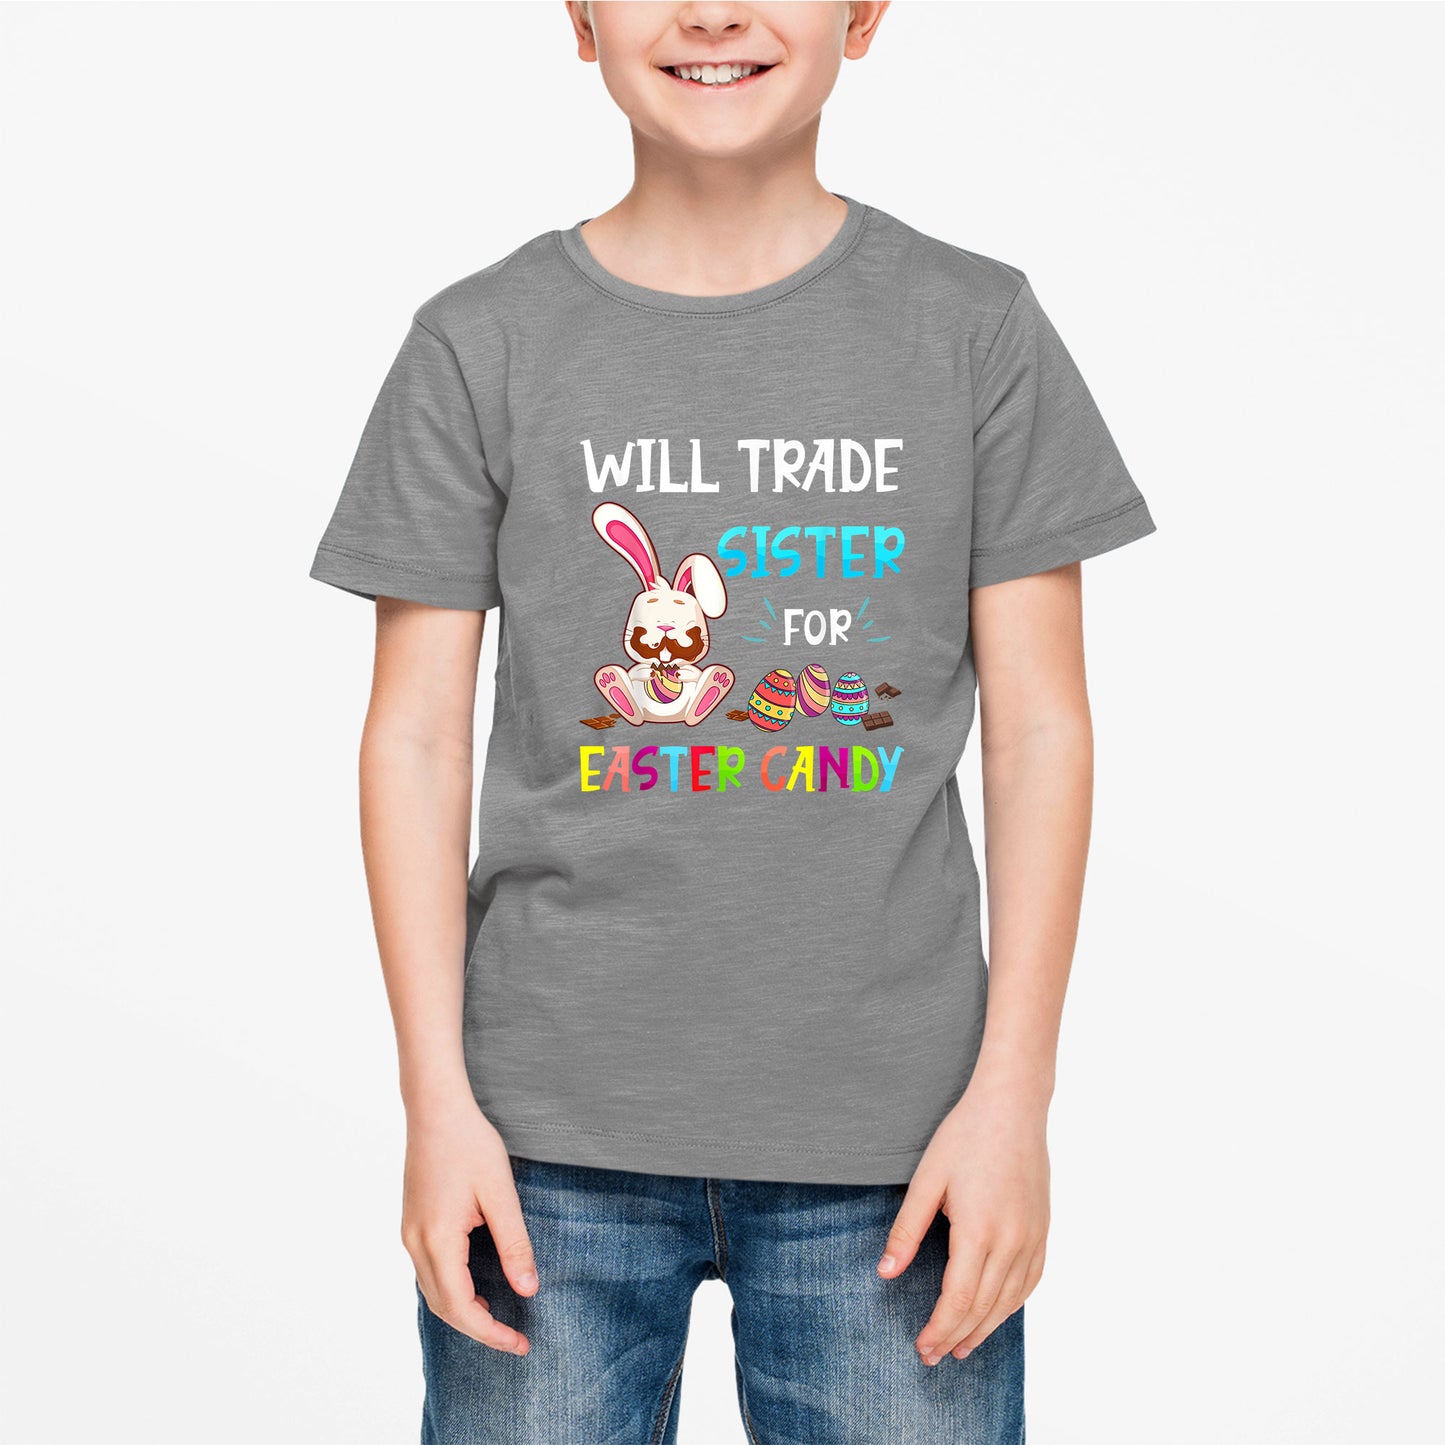 I Will Trade Sister For Easter Candy Shirt, Funny Easter Shirt, Toddler Boy Easter Shirt, Easter Gifts For Kids, Easter Gifts For Toddlers